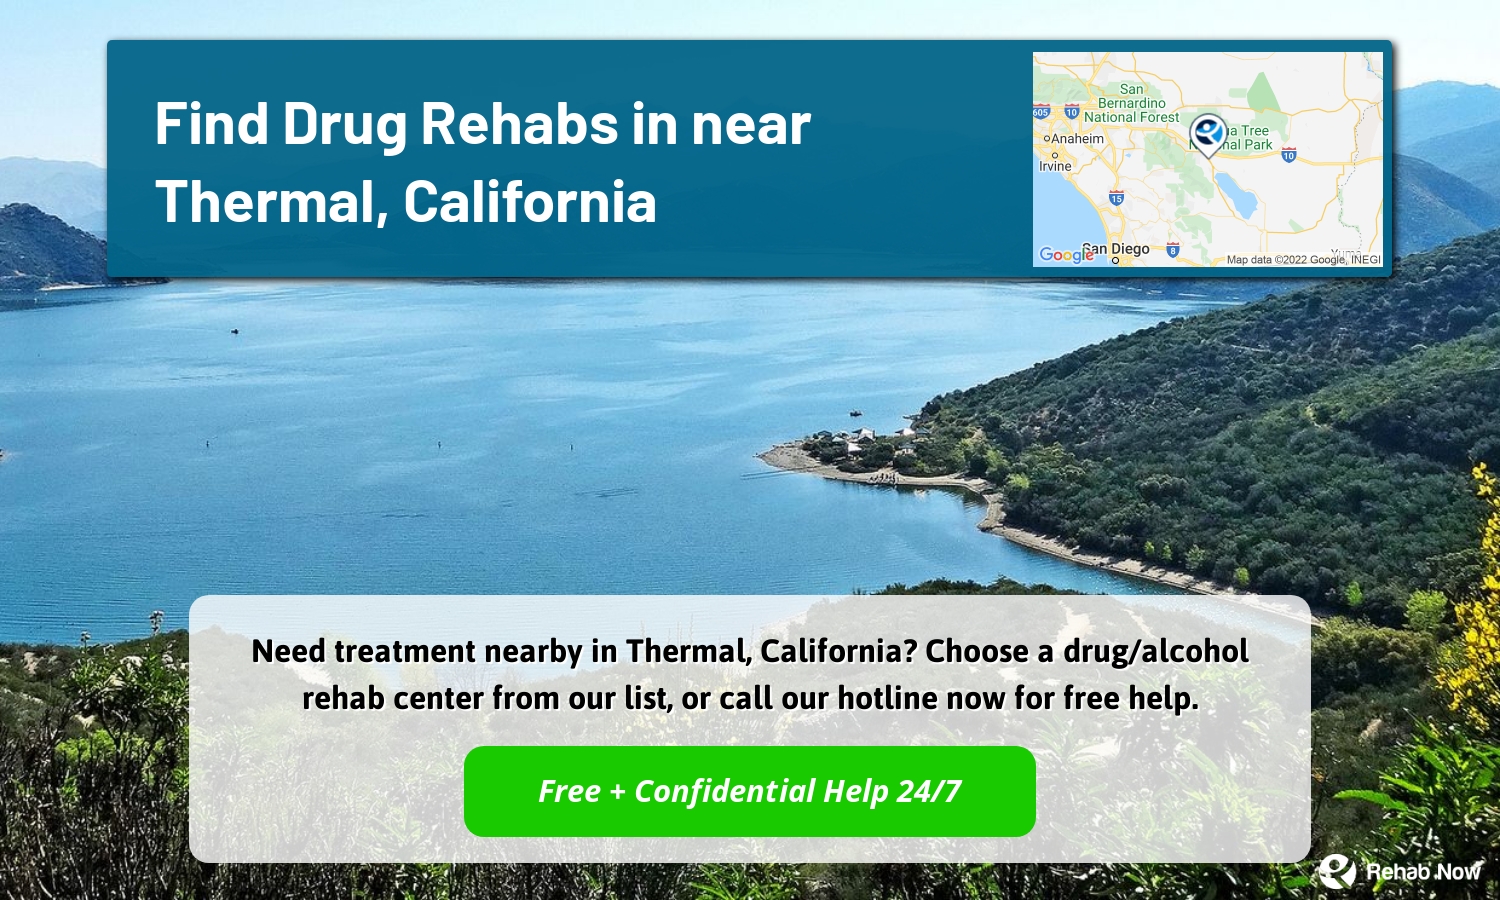 Need treatment nearby in Thermal, California? Choose a drug/alcohol rehab center from our list, or call our hotline now for free help.